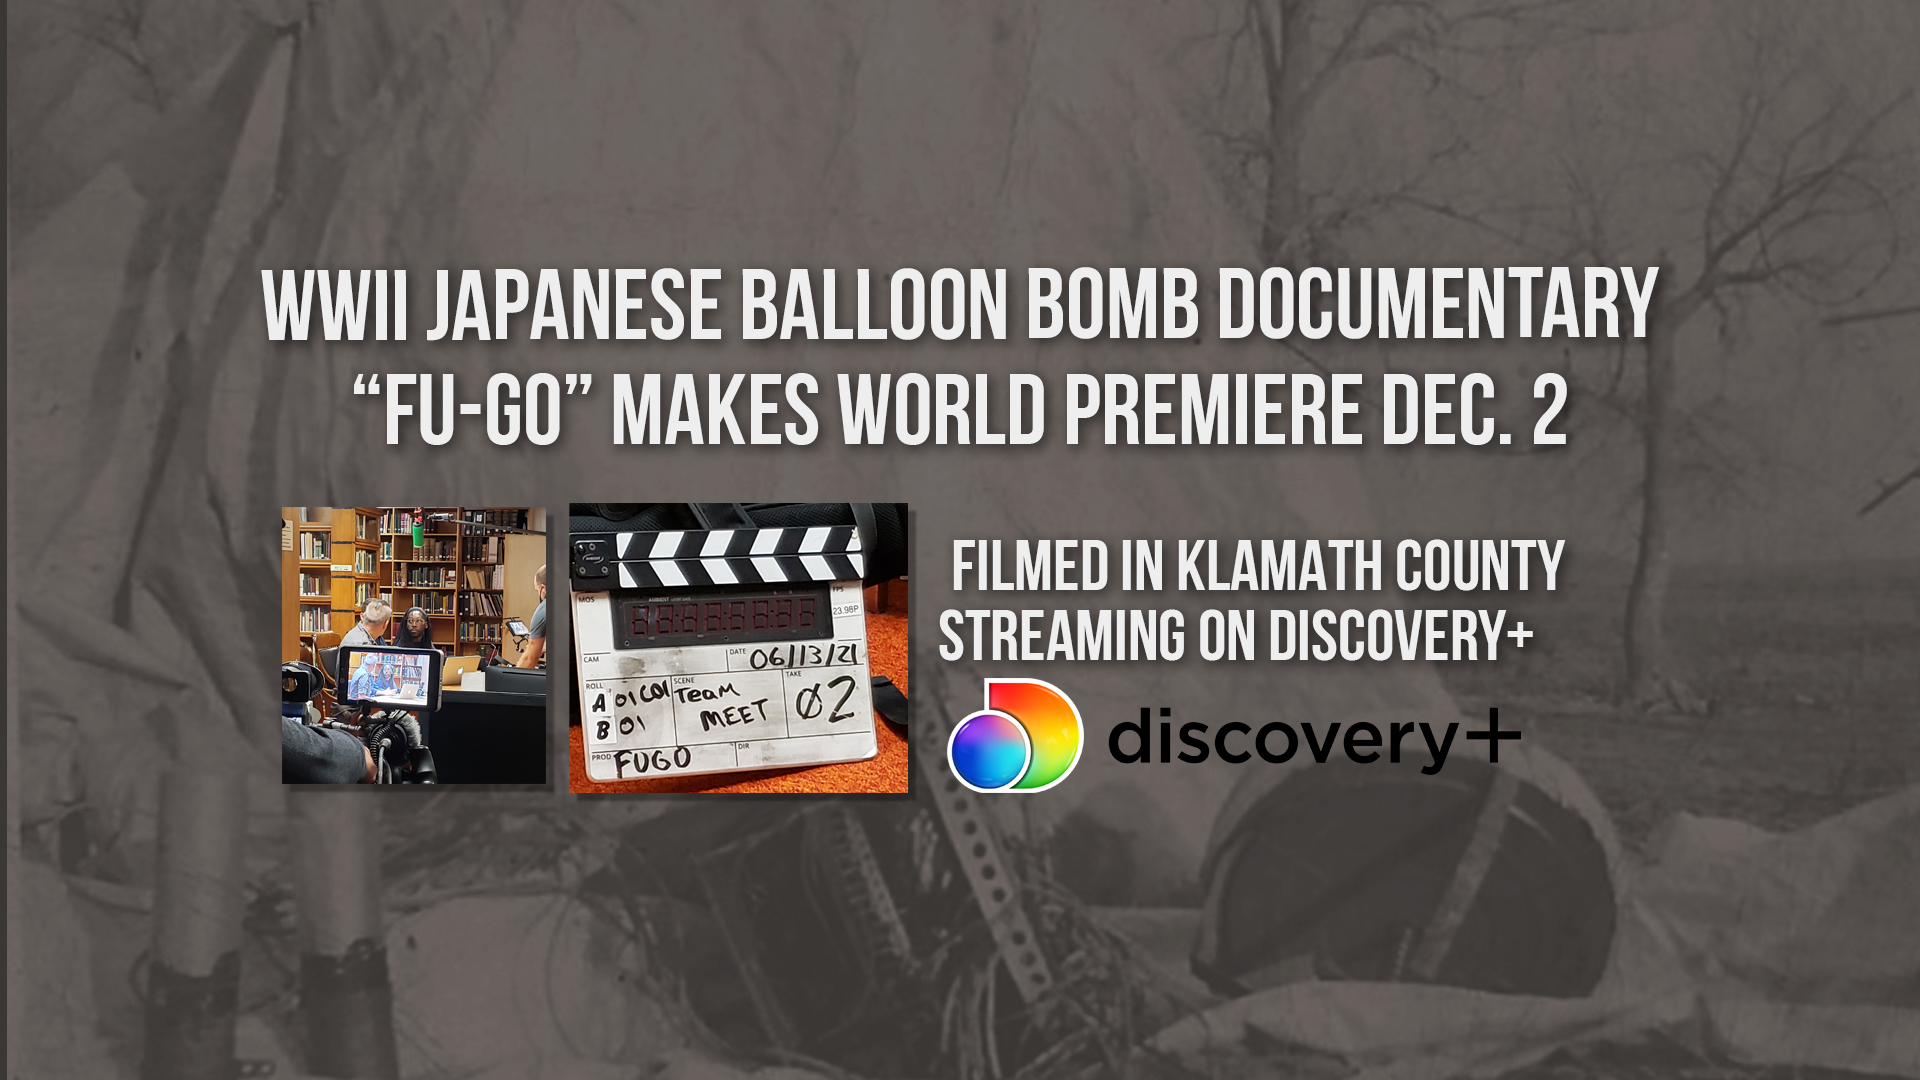 WWII Japanese Balloon Bomb documentary makes world premiere Dec. 2